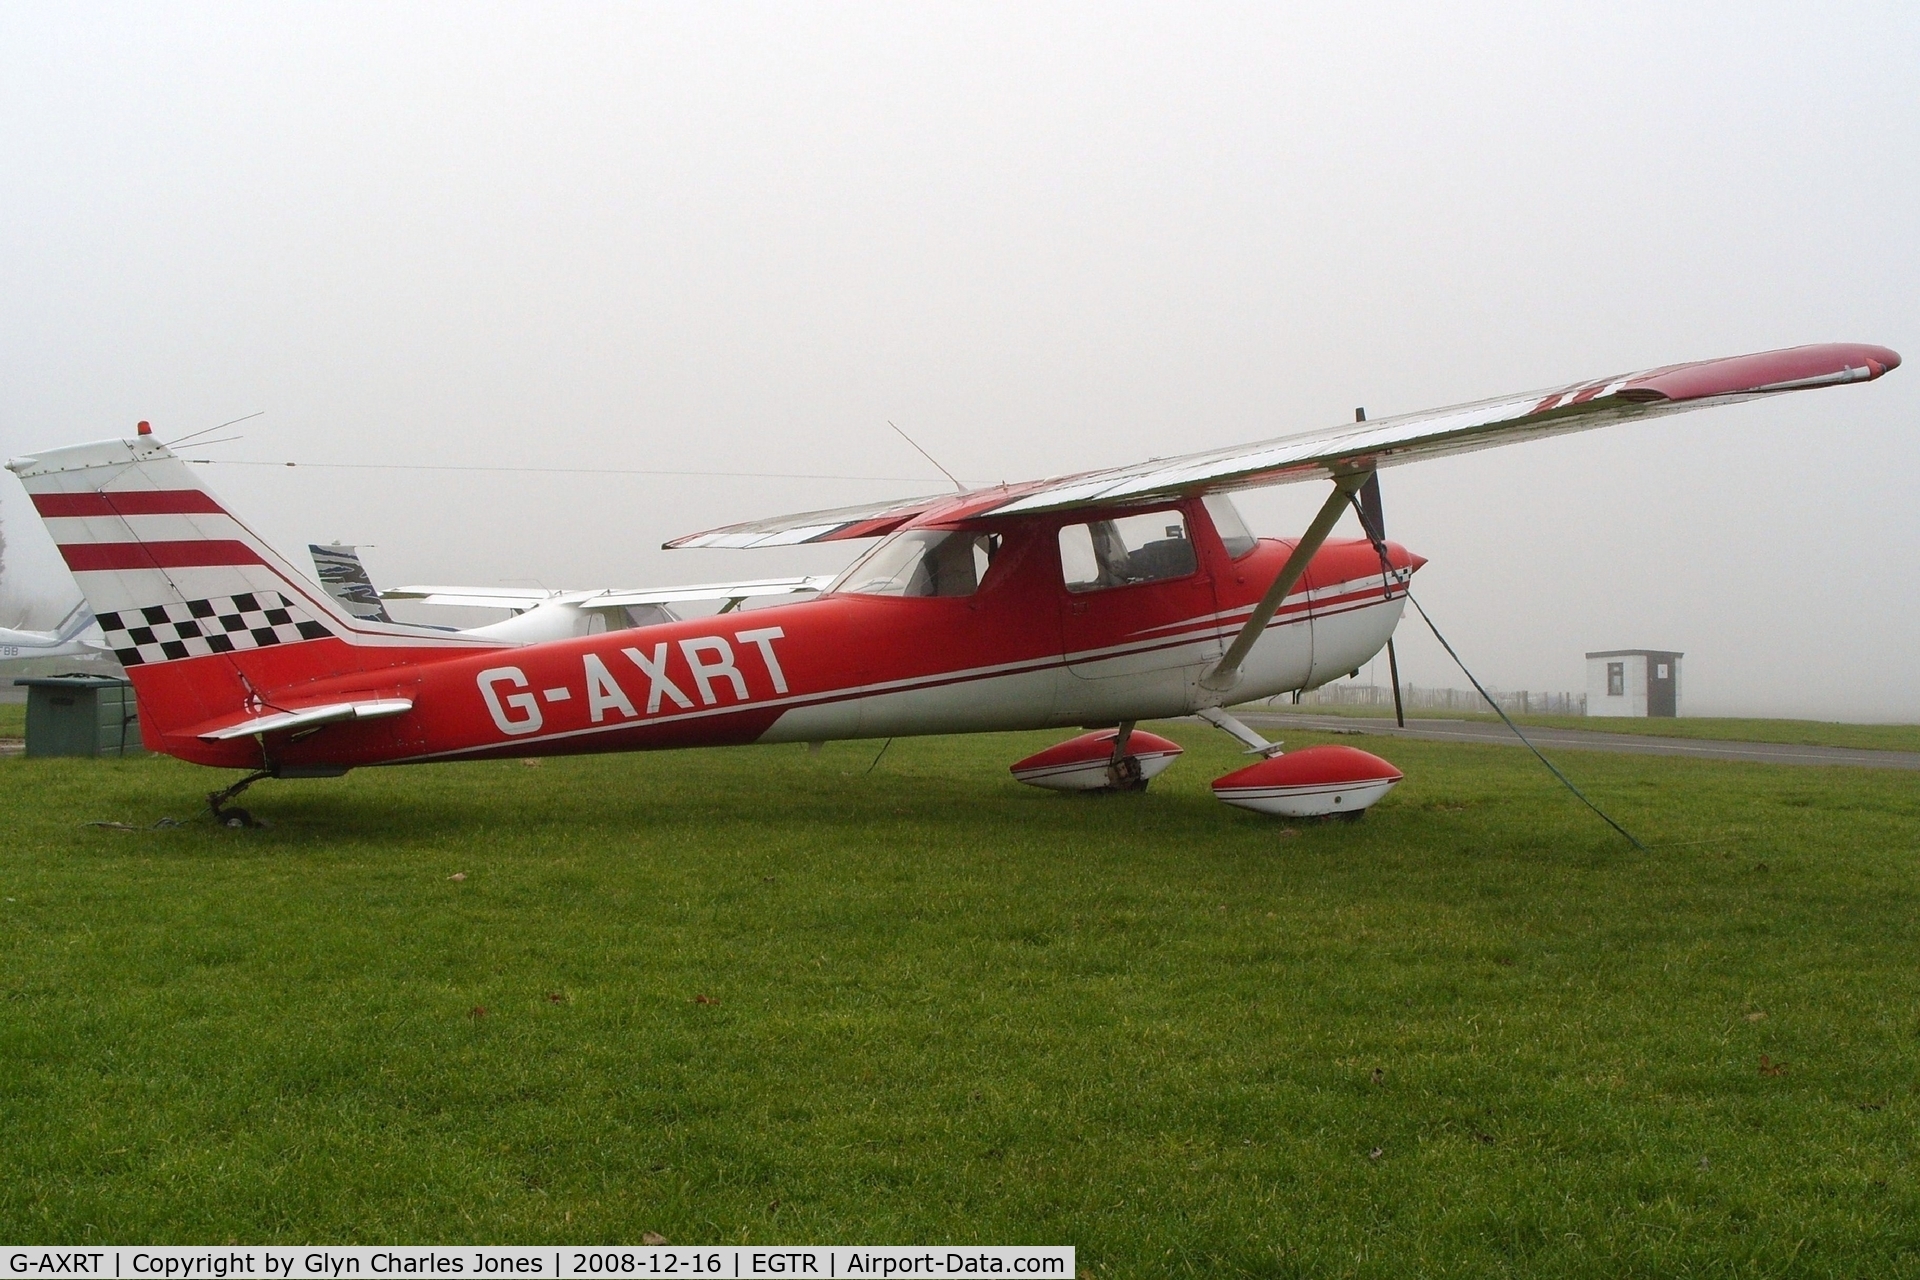 G-AXRT, 1970 Reims FA150K Aerobat C/N 0018, Taken on a quiet cold and foggy day. With thanks to Elstree control tower who granted me authority to take photographs on the aerodrome.